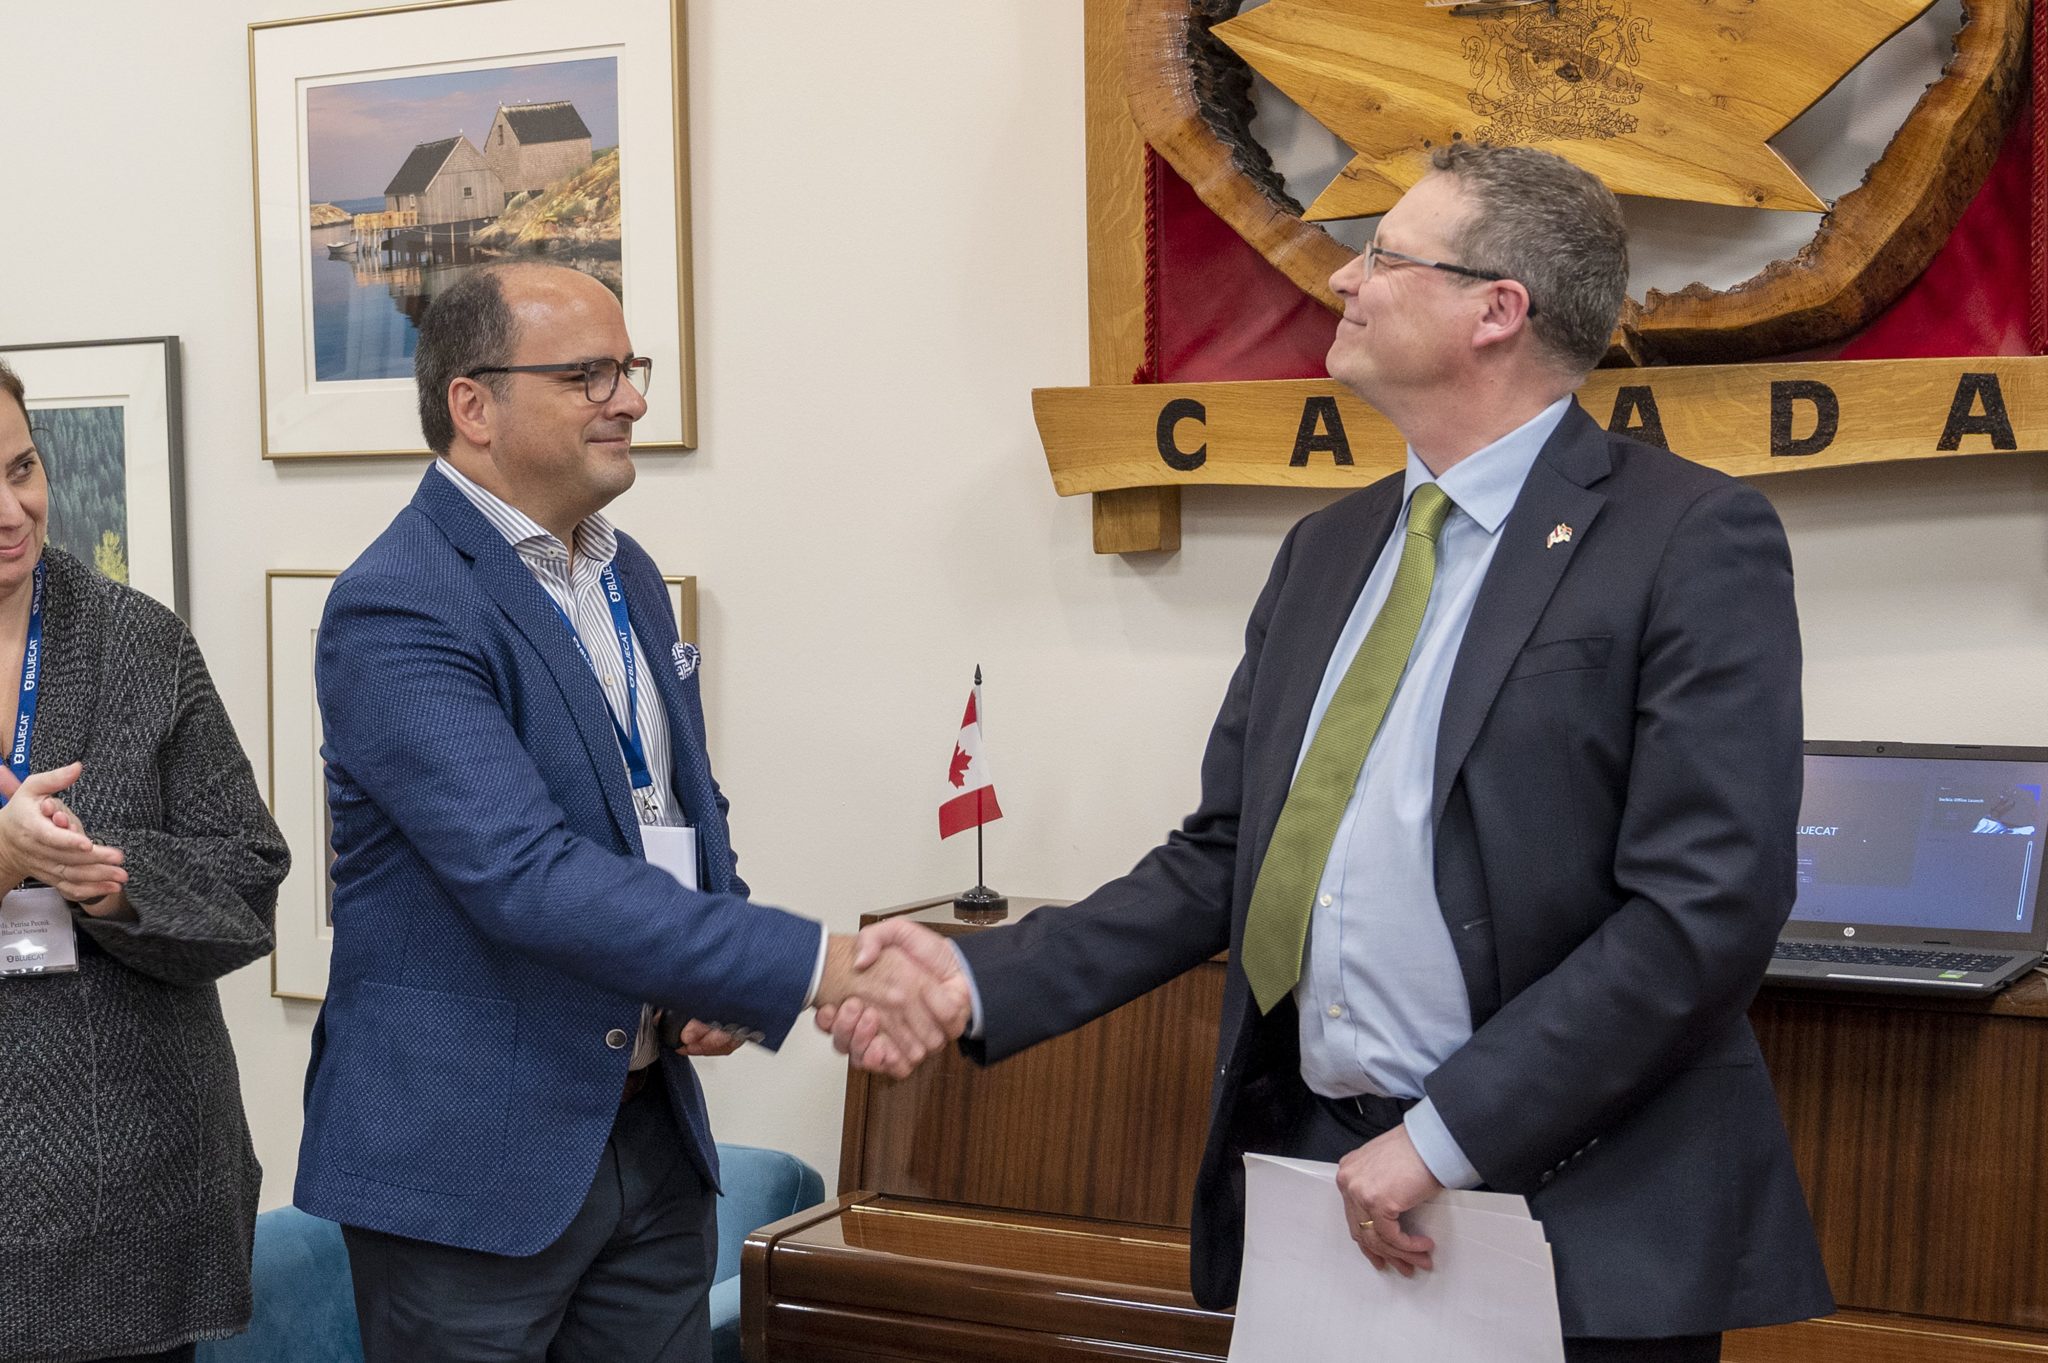 CEO Stephen Devito shakes hands with Giles Norman, Ambassador of Canada to Serbia, during BlueCat